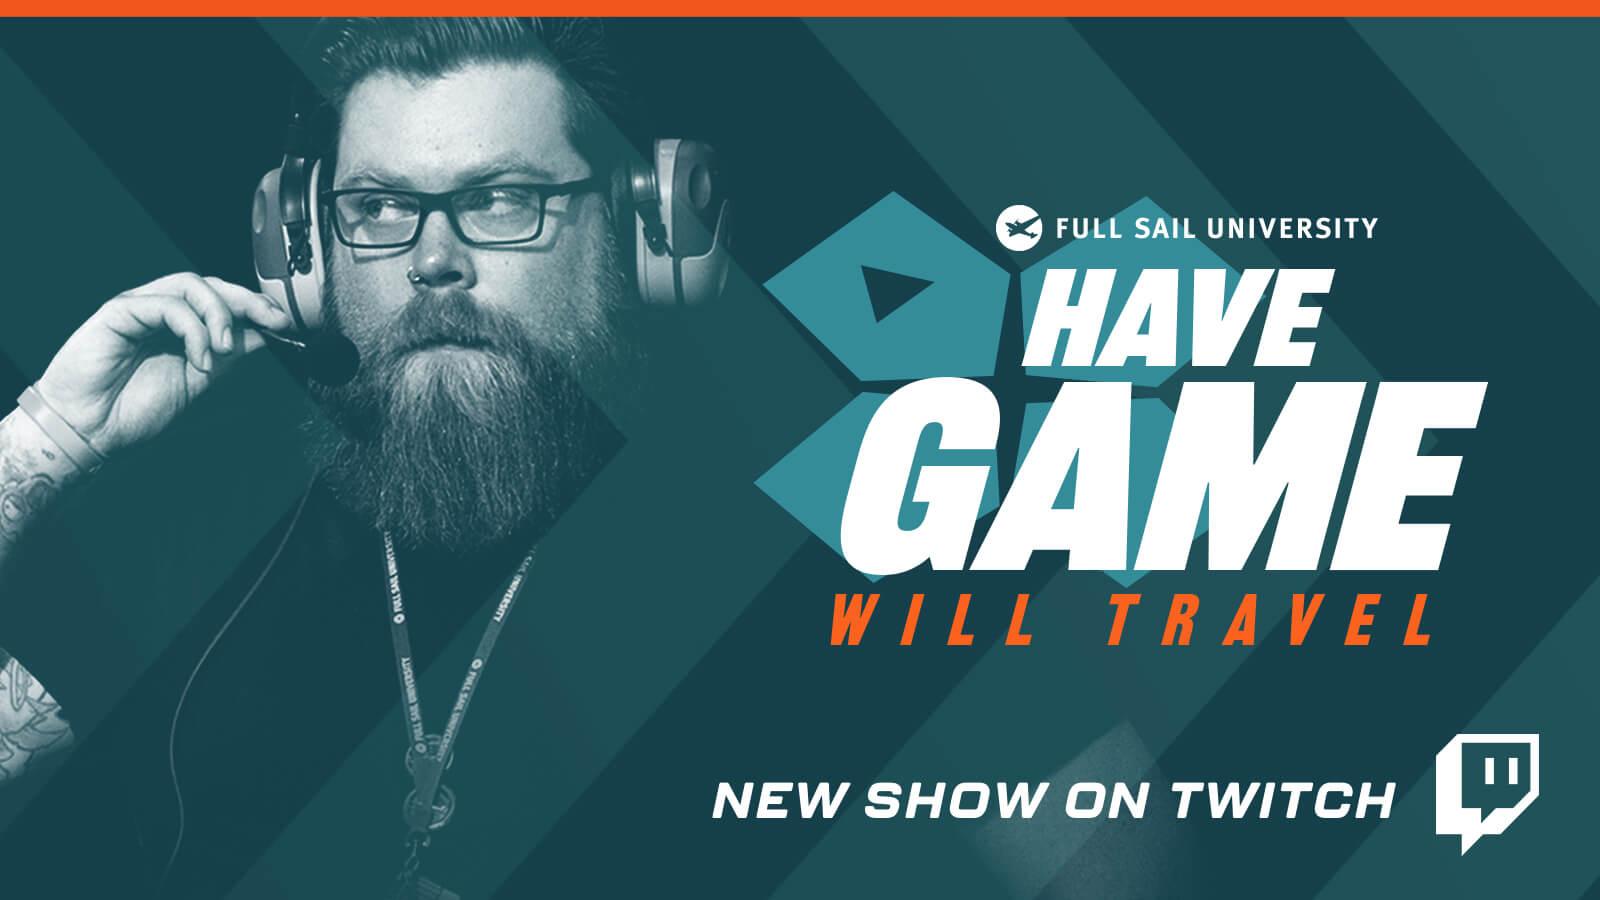 A blue-toned graphic of a bearded man with glasses wearing gaming headphones. The text to the right of him says Full Sail University, Have Game Will Travel, new show on Twitch. The Twitch logo appears in the bottom right corner.